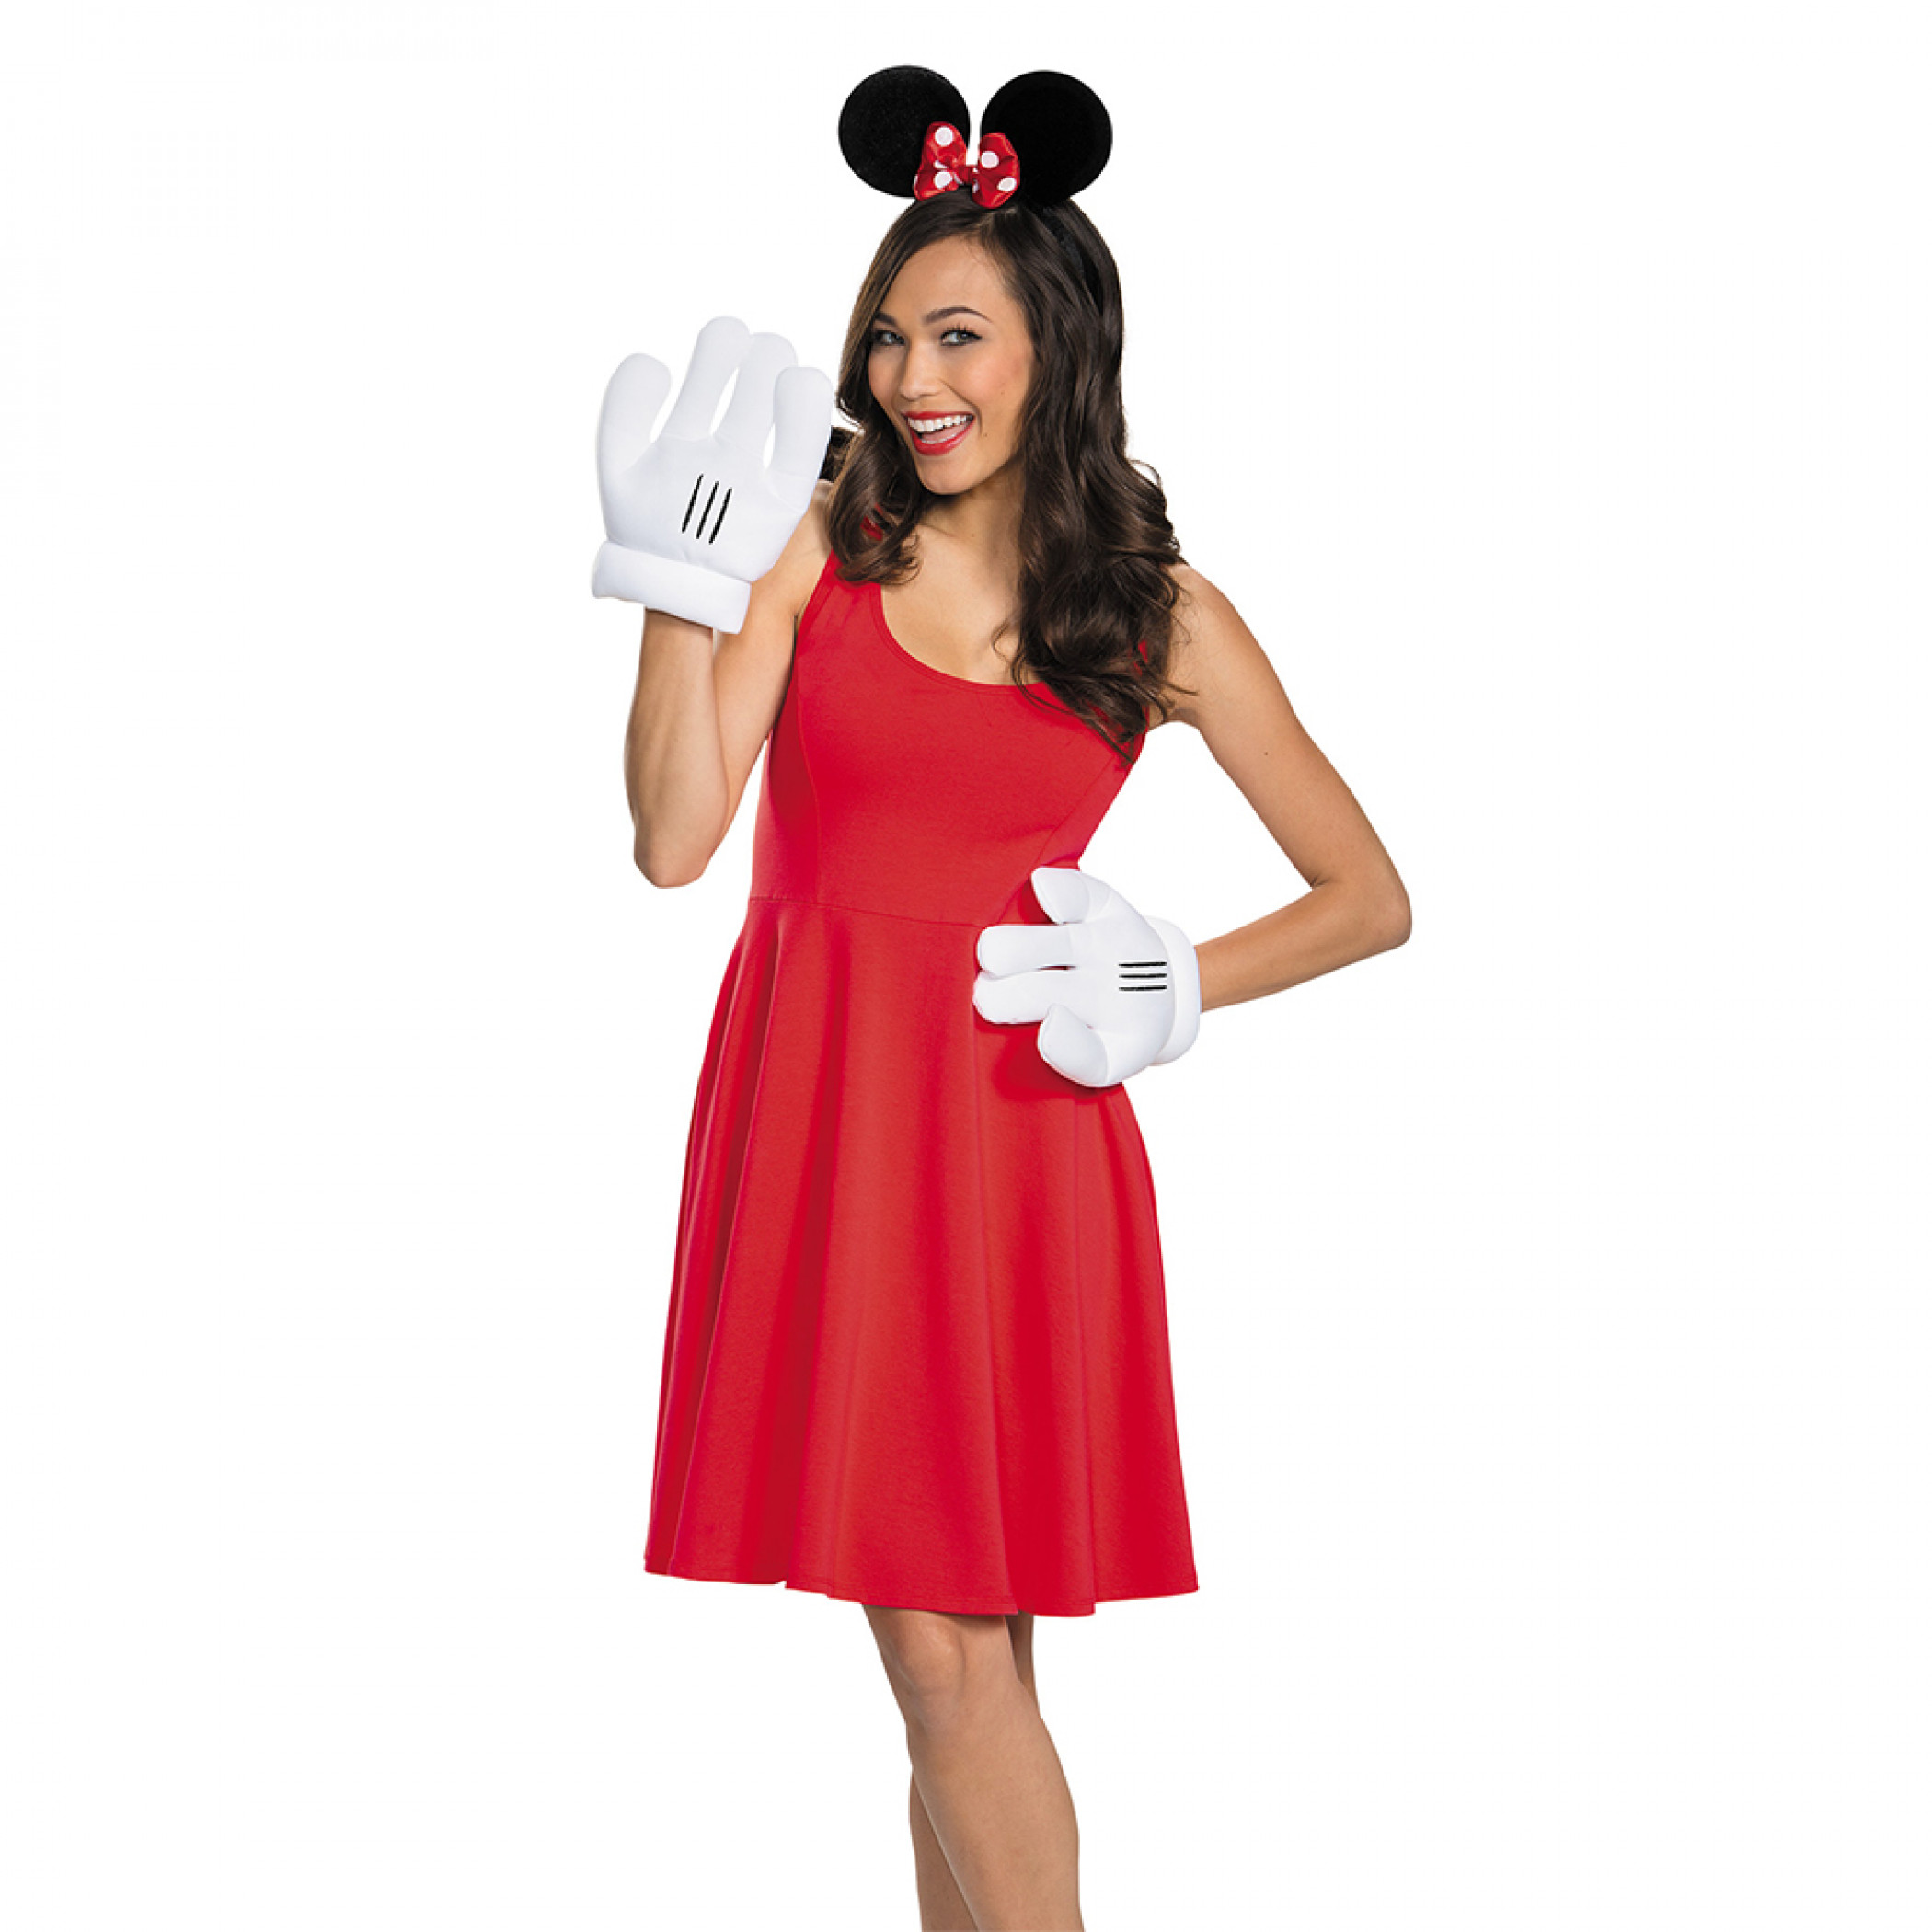 Disney Minnie Mouse Ears and Gloves Costume Set